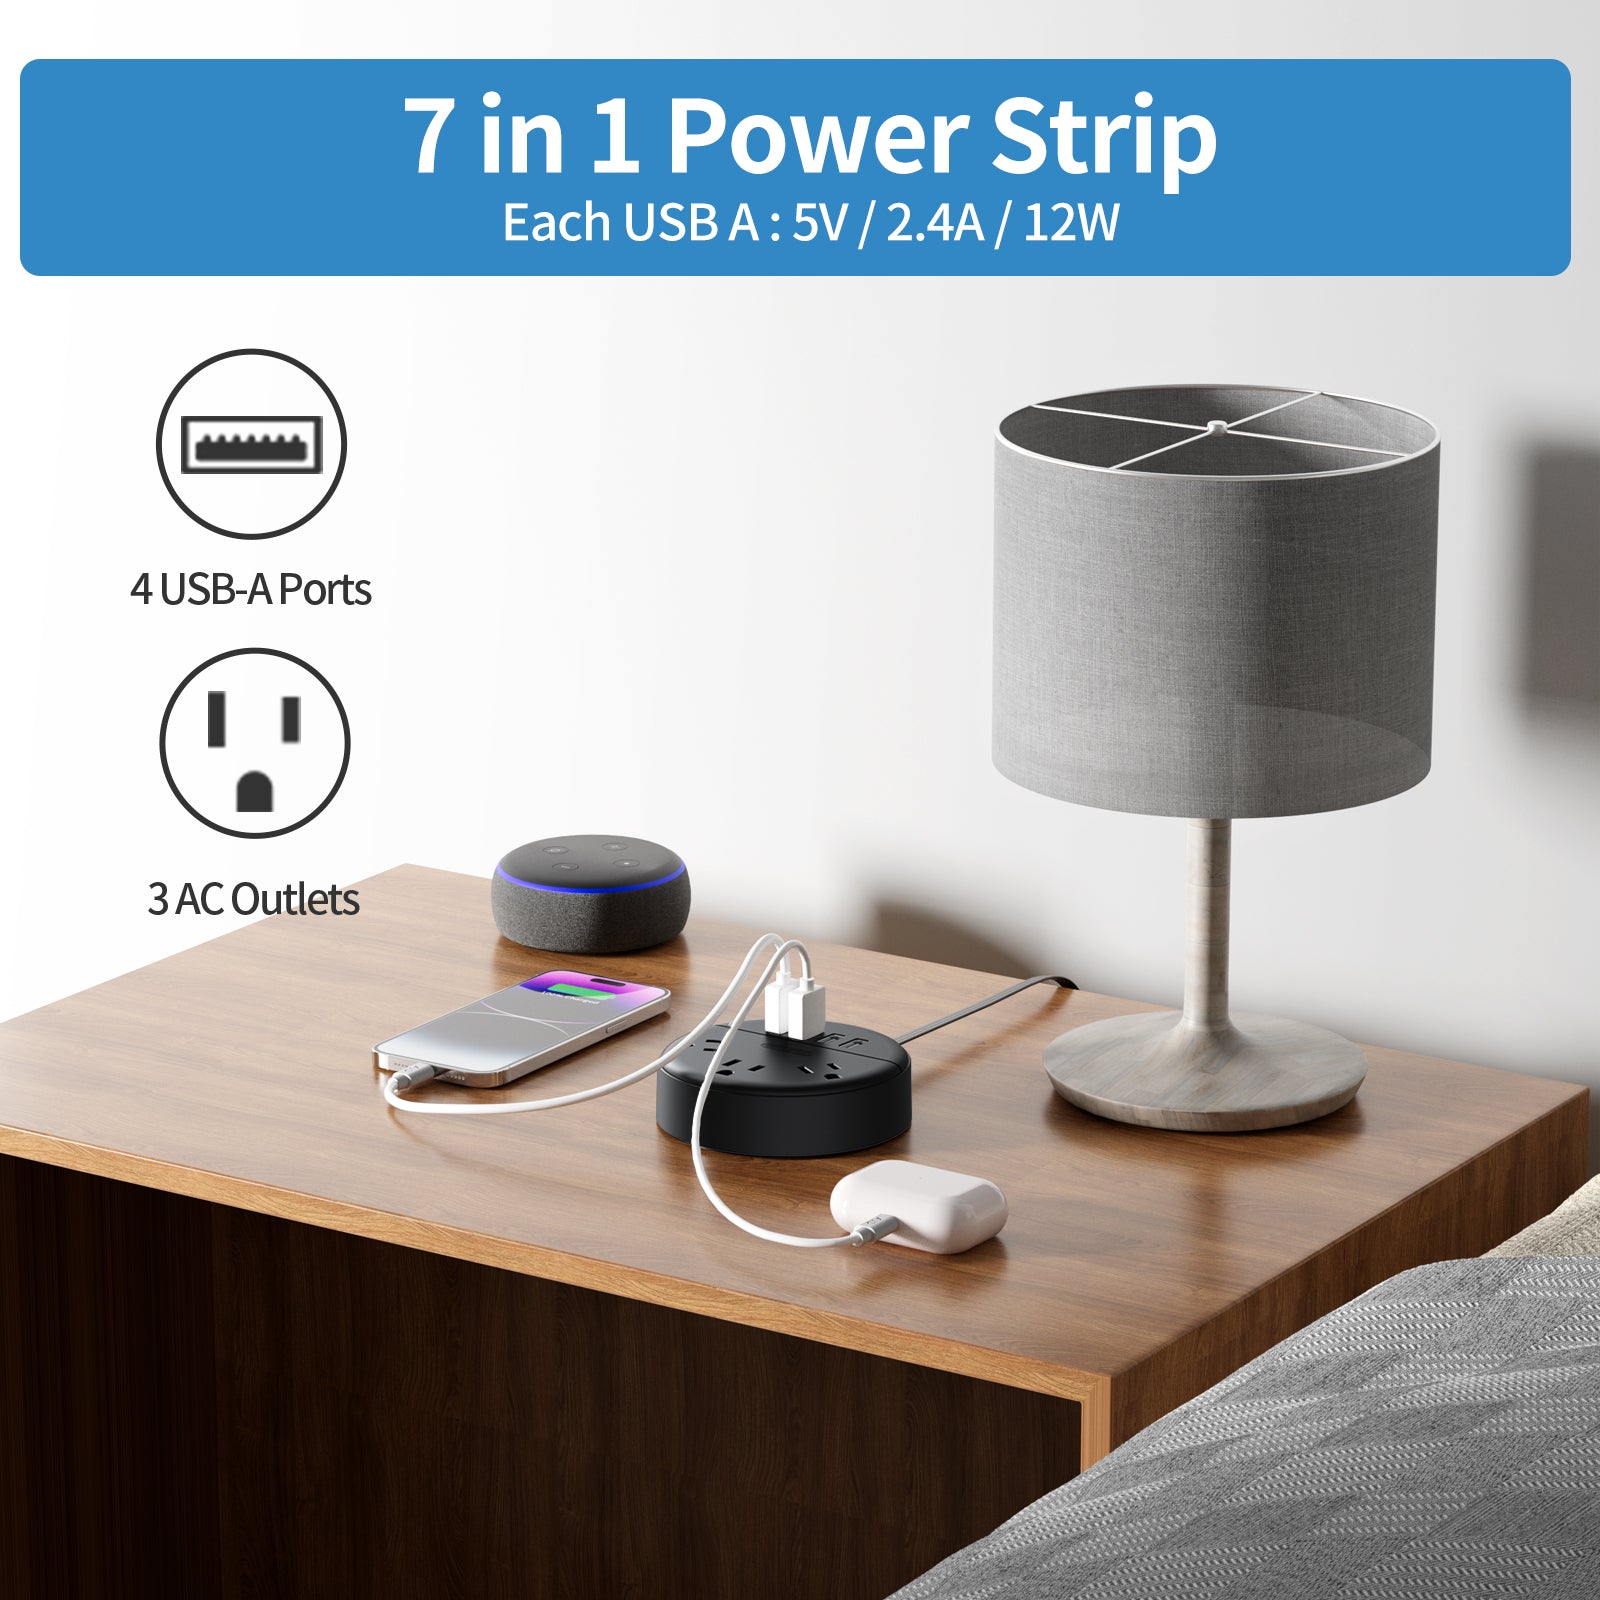 Ntonpower New Dot Flat Cord Power Strip 3 Outlets 4 USB Ports